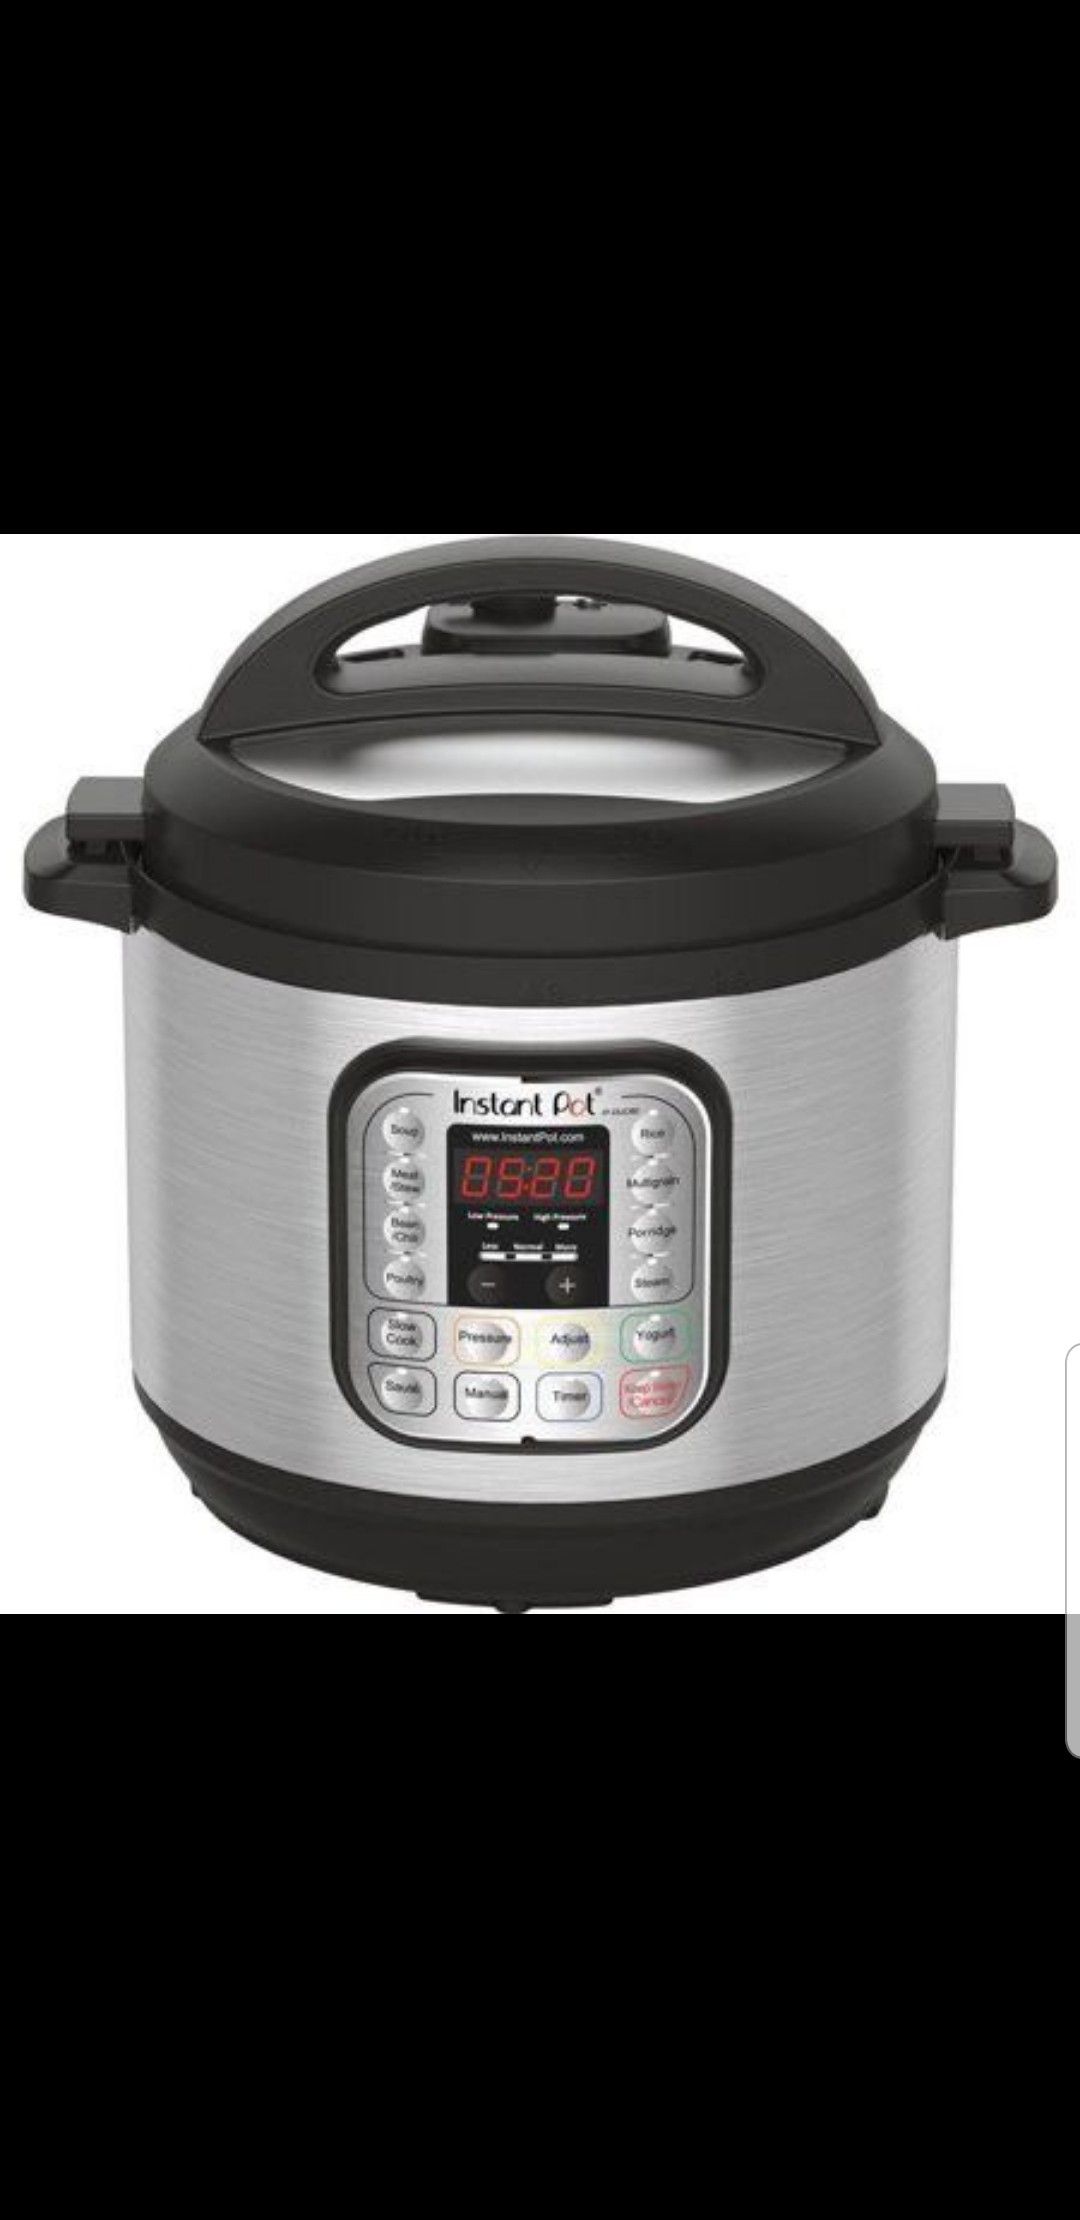 New in box Instant Pot DUO80 8 Qt 7-in-1 Multi- Use Programmable Pressure Cooker☆Retail:$99+Tax